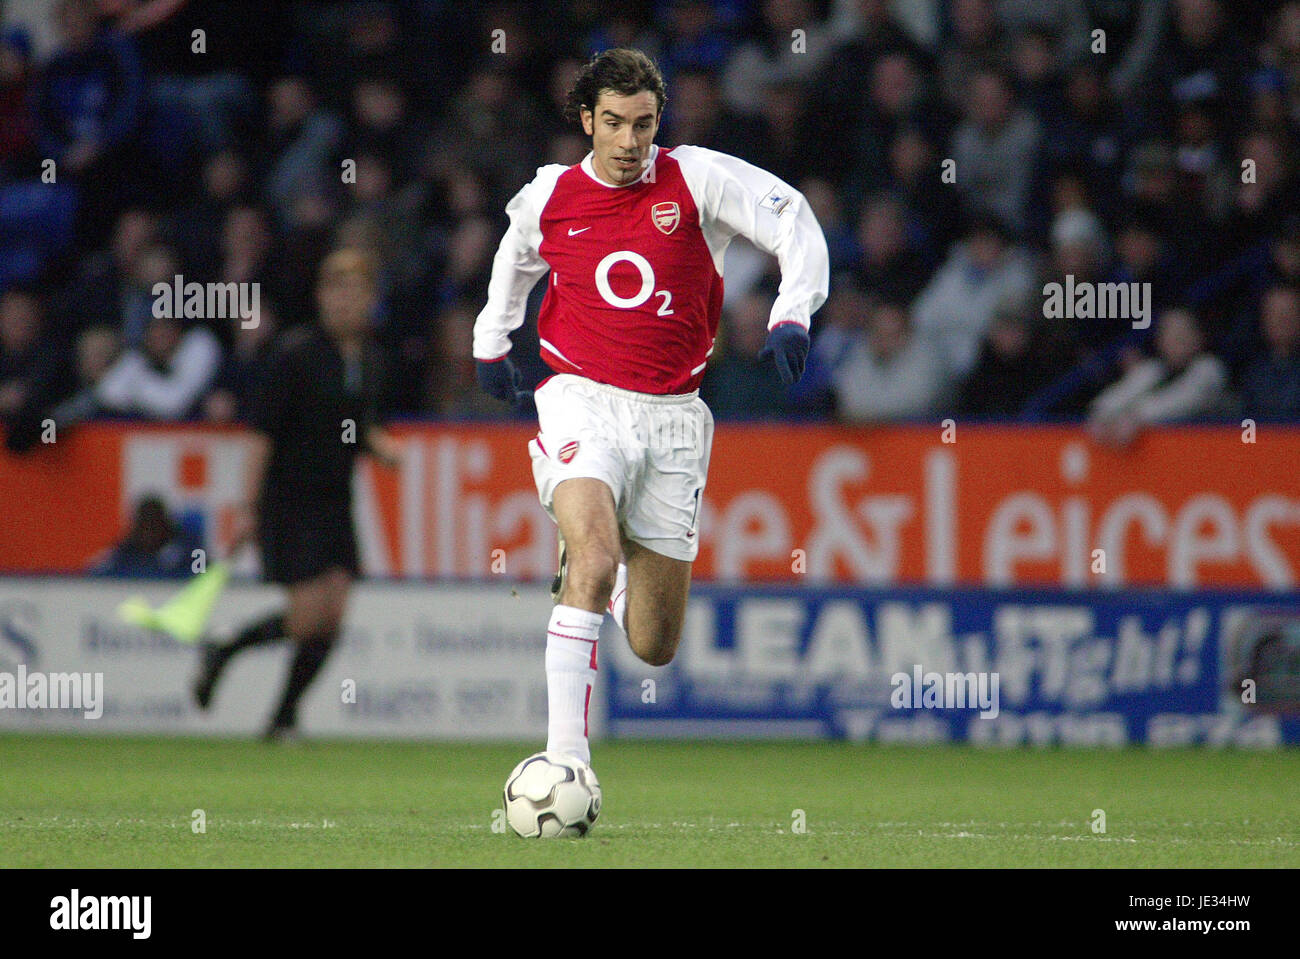 ROBERT PIRES ARSENAL FC WALKERS BOWL LEICESTER ENGLAND 06 December 2003 Stock Photo